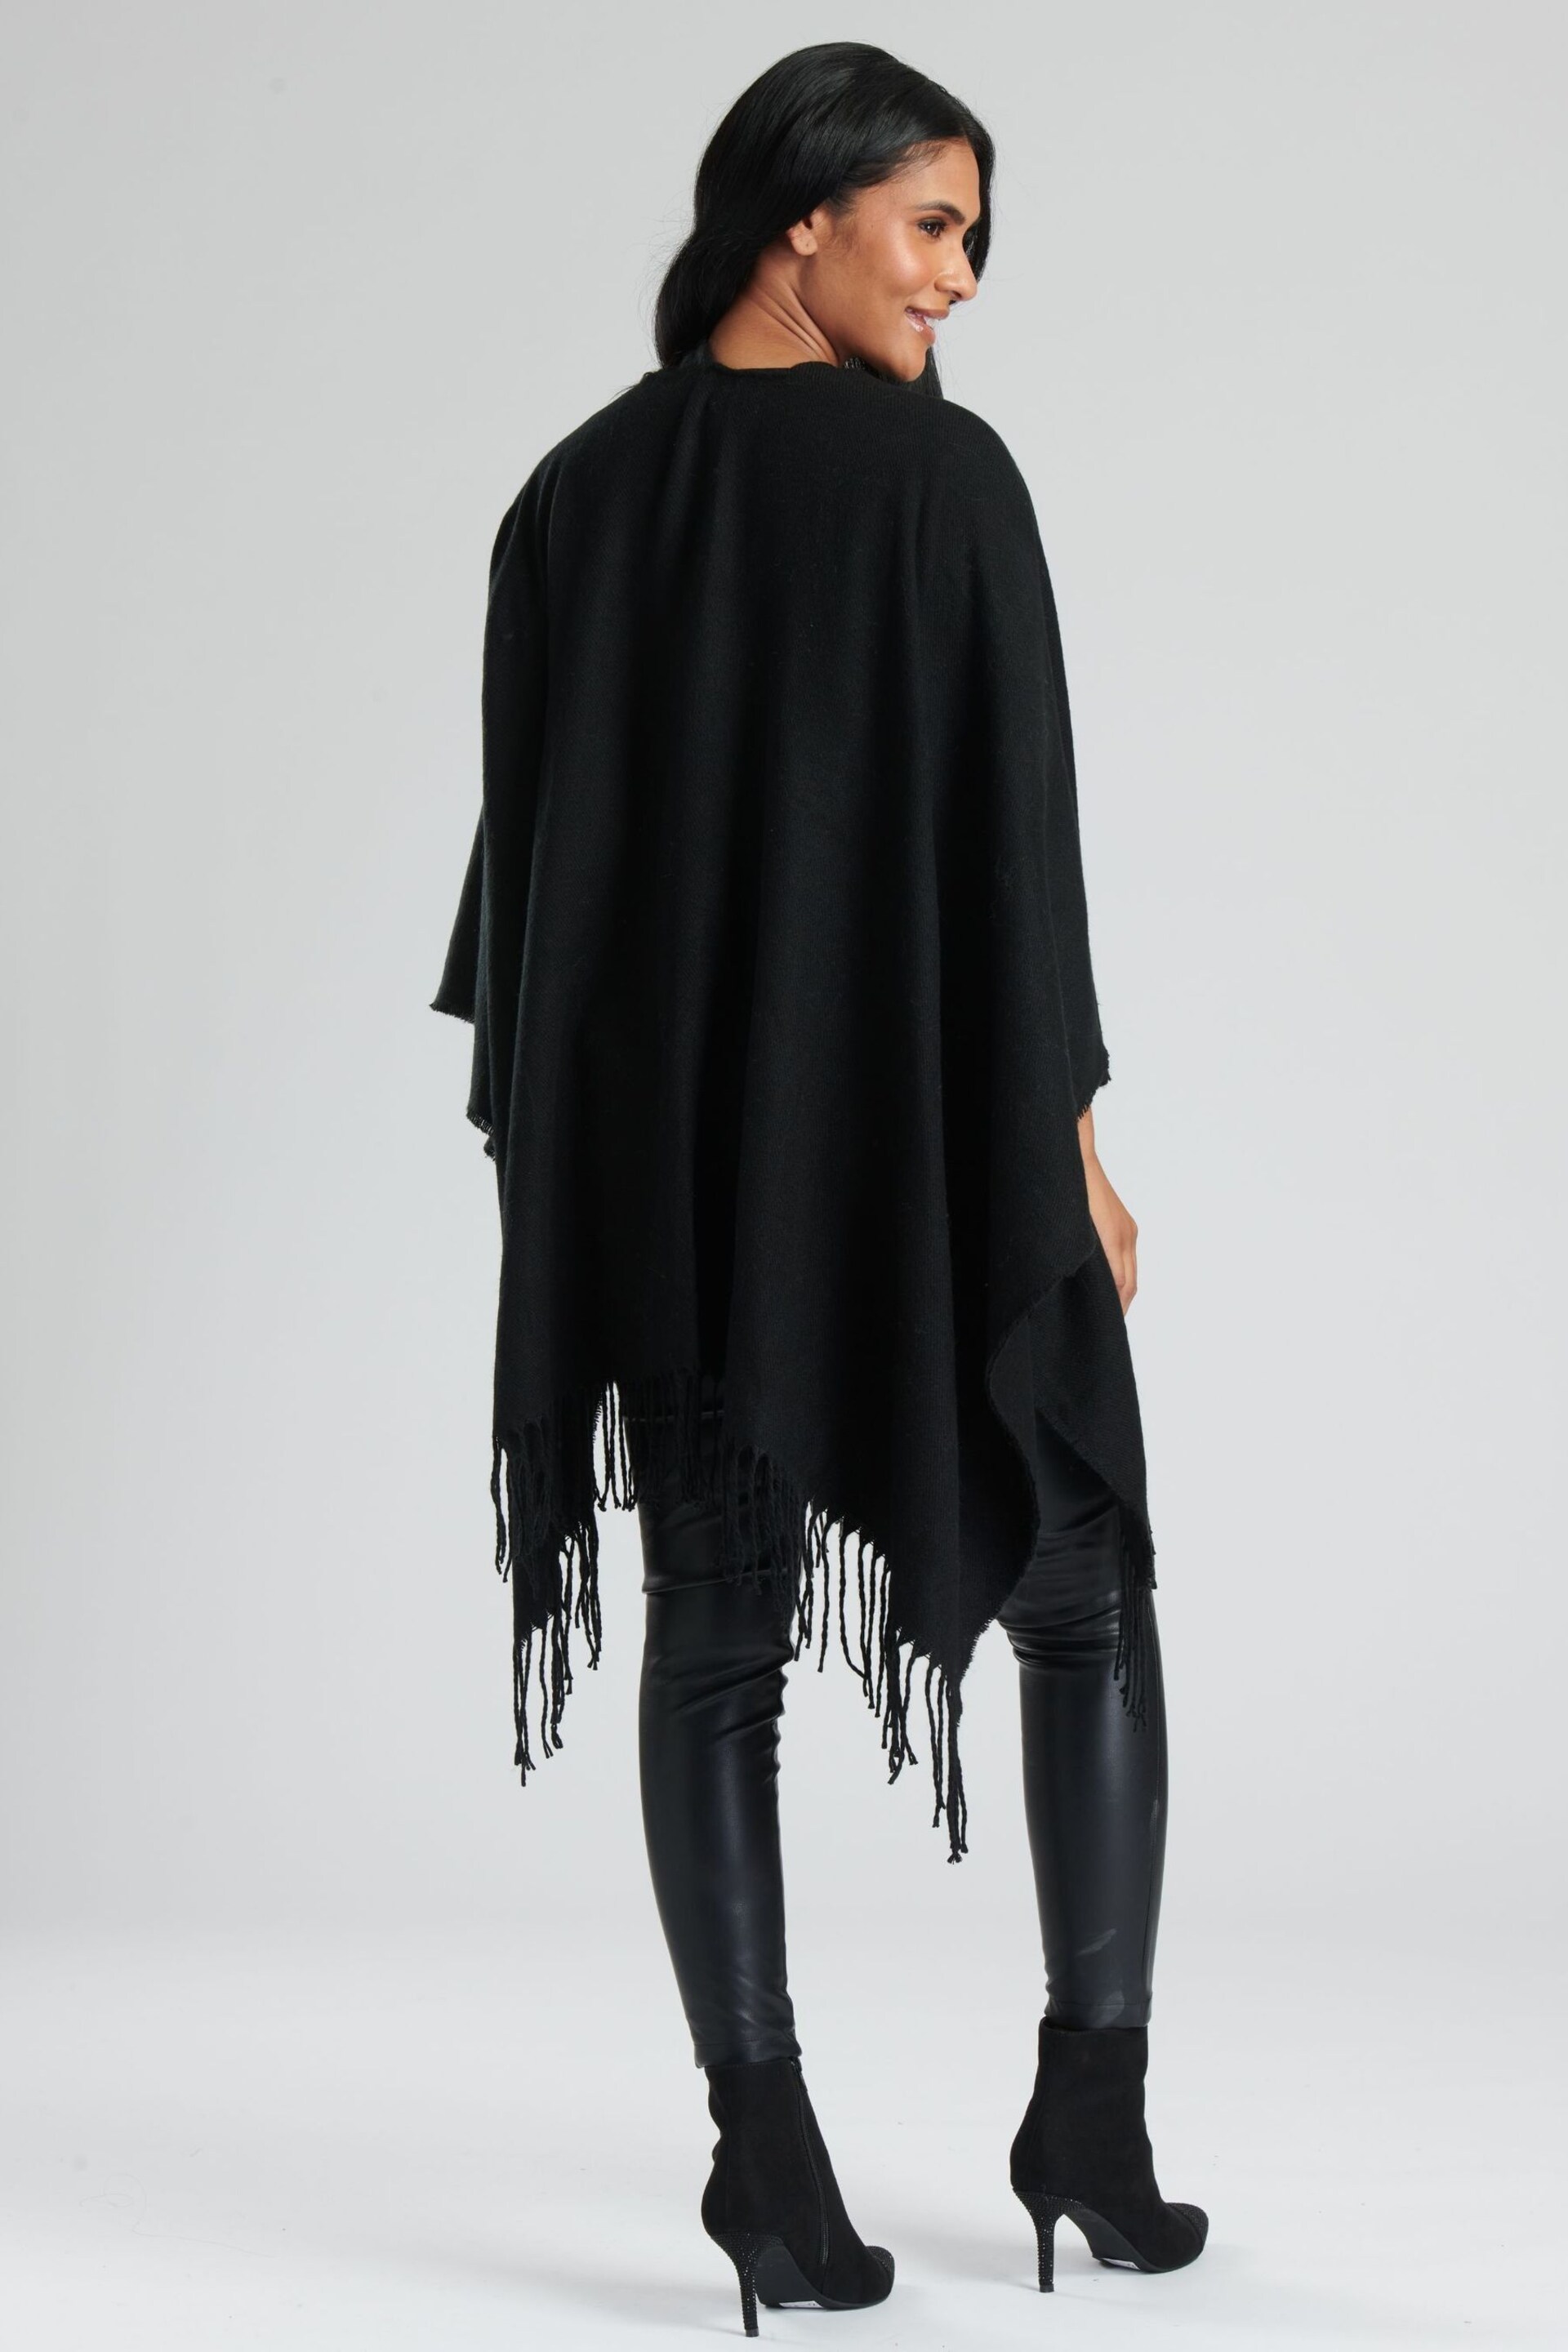 South Beach Black Knitted Fringe Wrap - Image 5 of 5